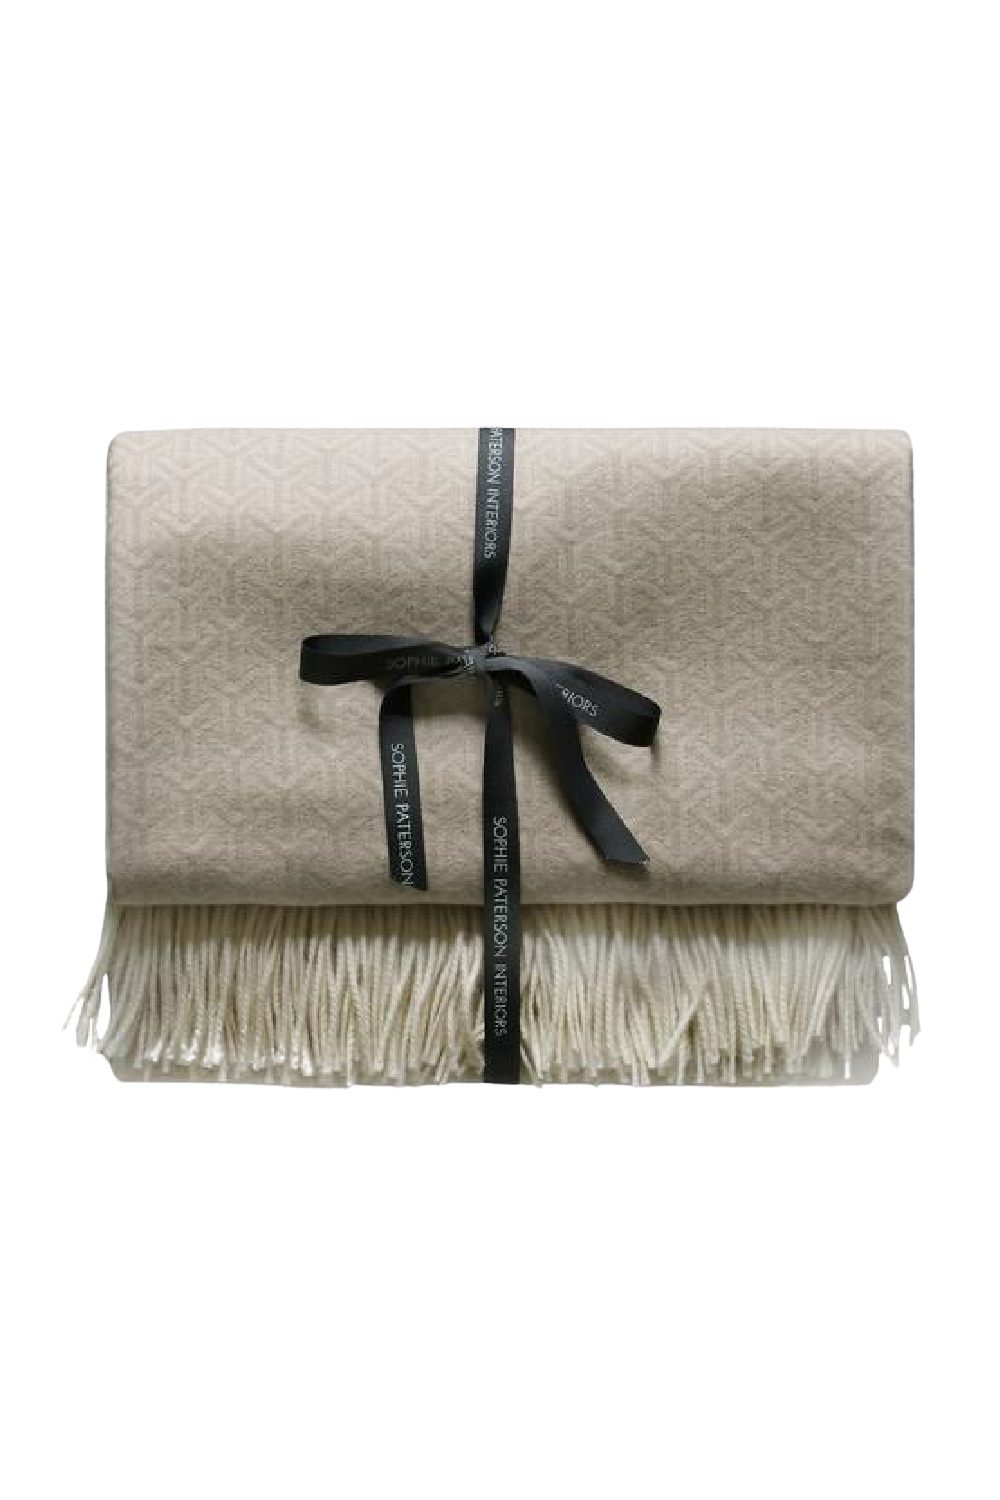 Nude Wool and Cashmere Geometric Throw | Andrew Martin Monte  | OROA